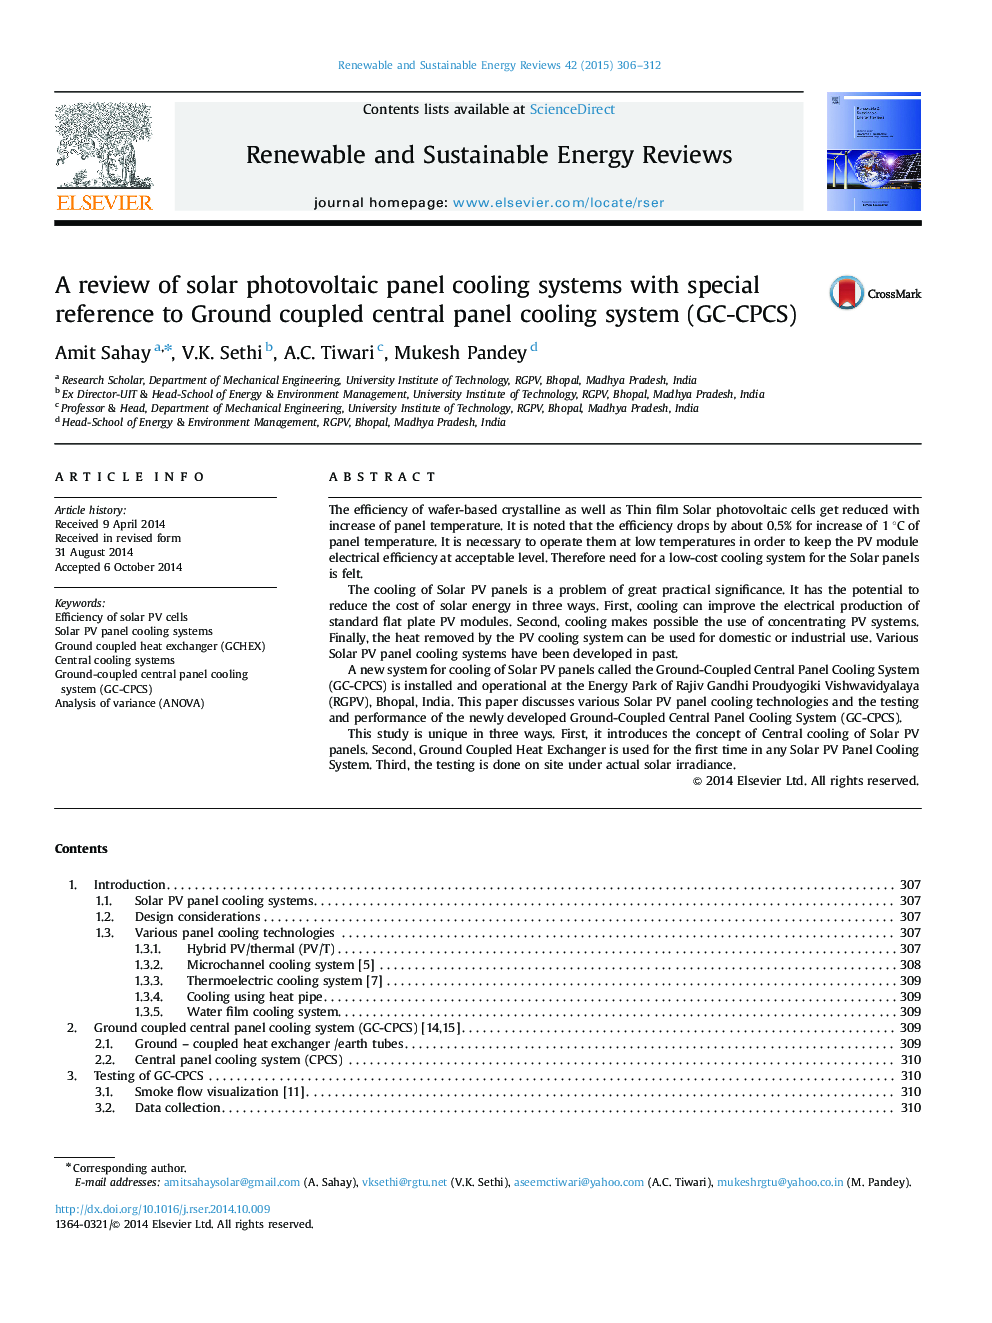 A review of solar photovoltaic panel cooling systems with special reference to Ground coupled central panel cooling system (GC-CPCS)